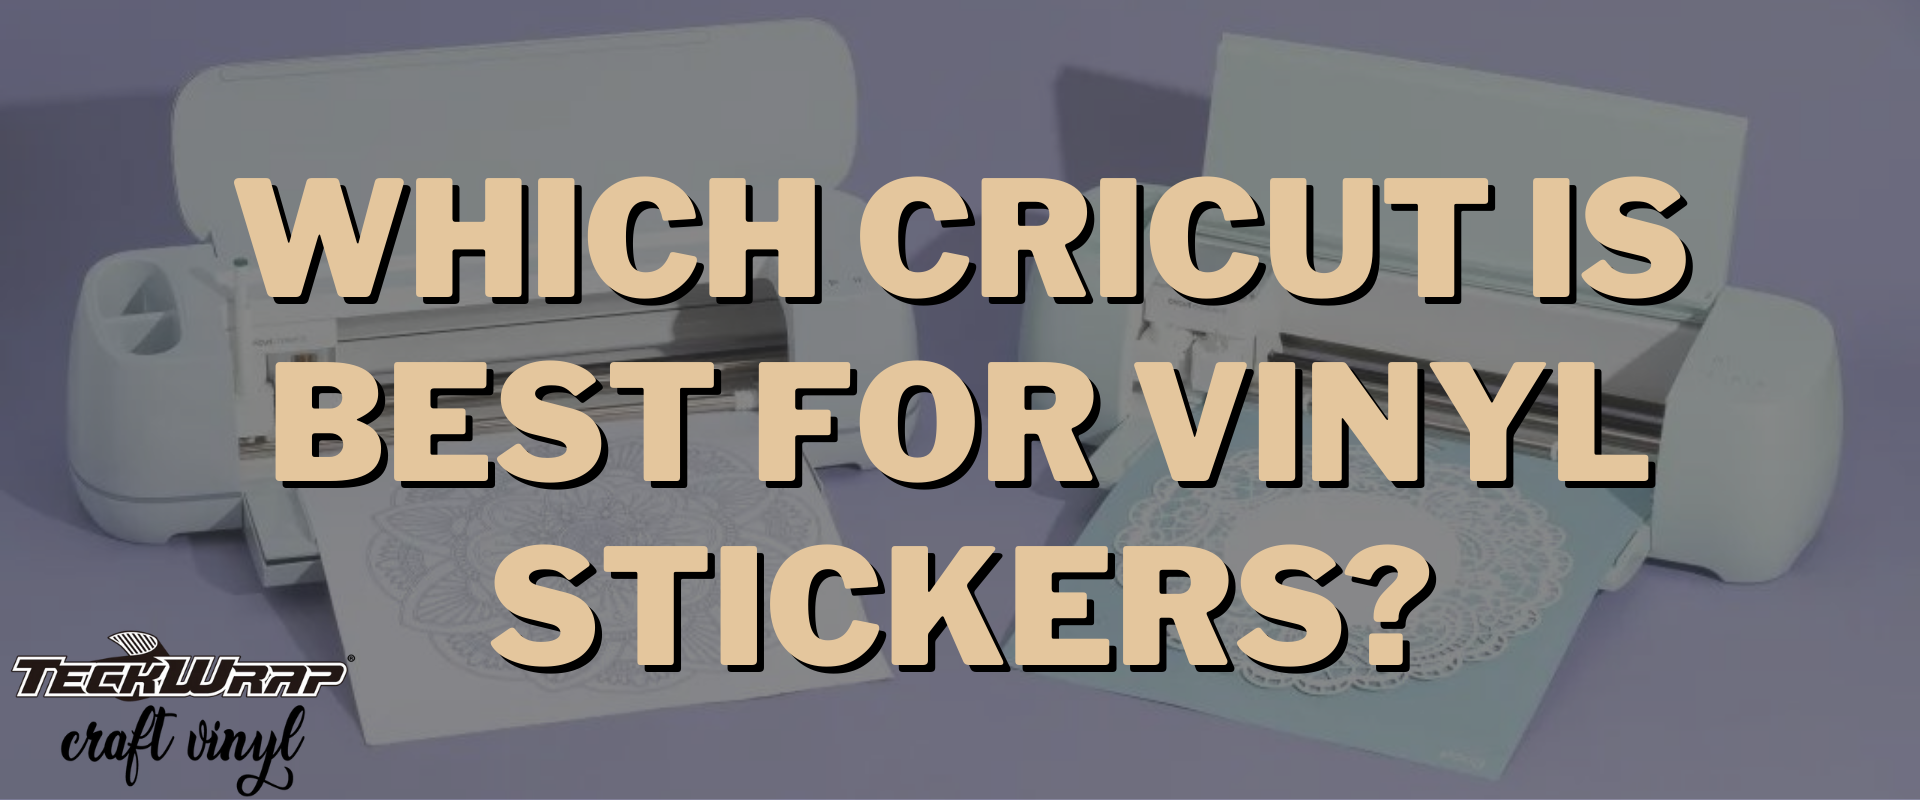 Which Cricut Is Best For Vinyl Stickers?– TeckwrapCraft